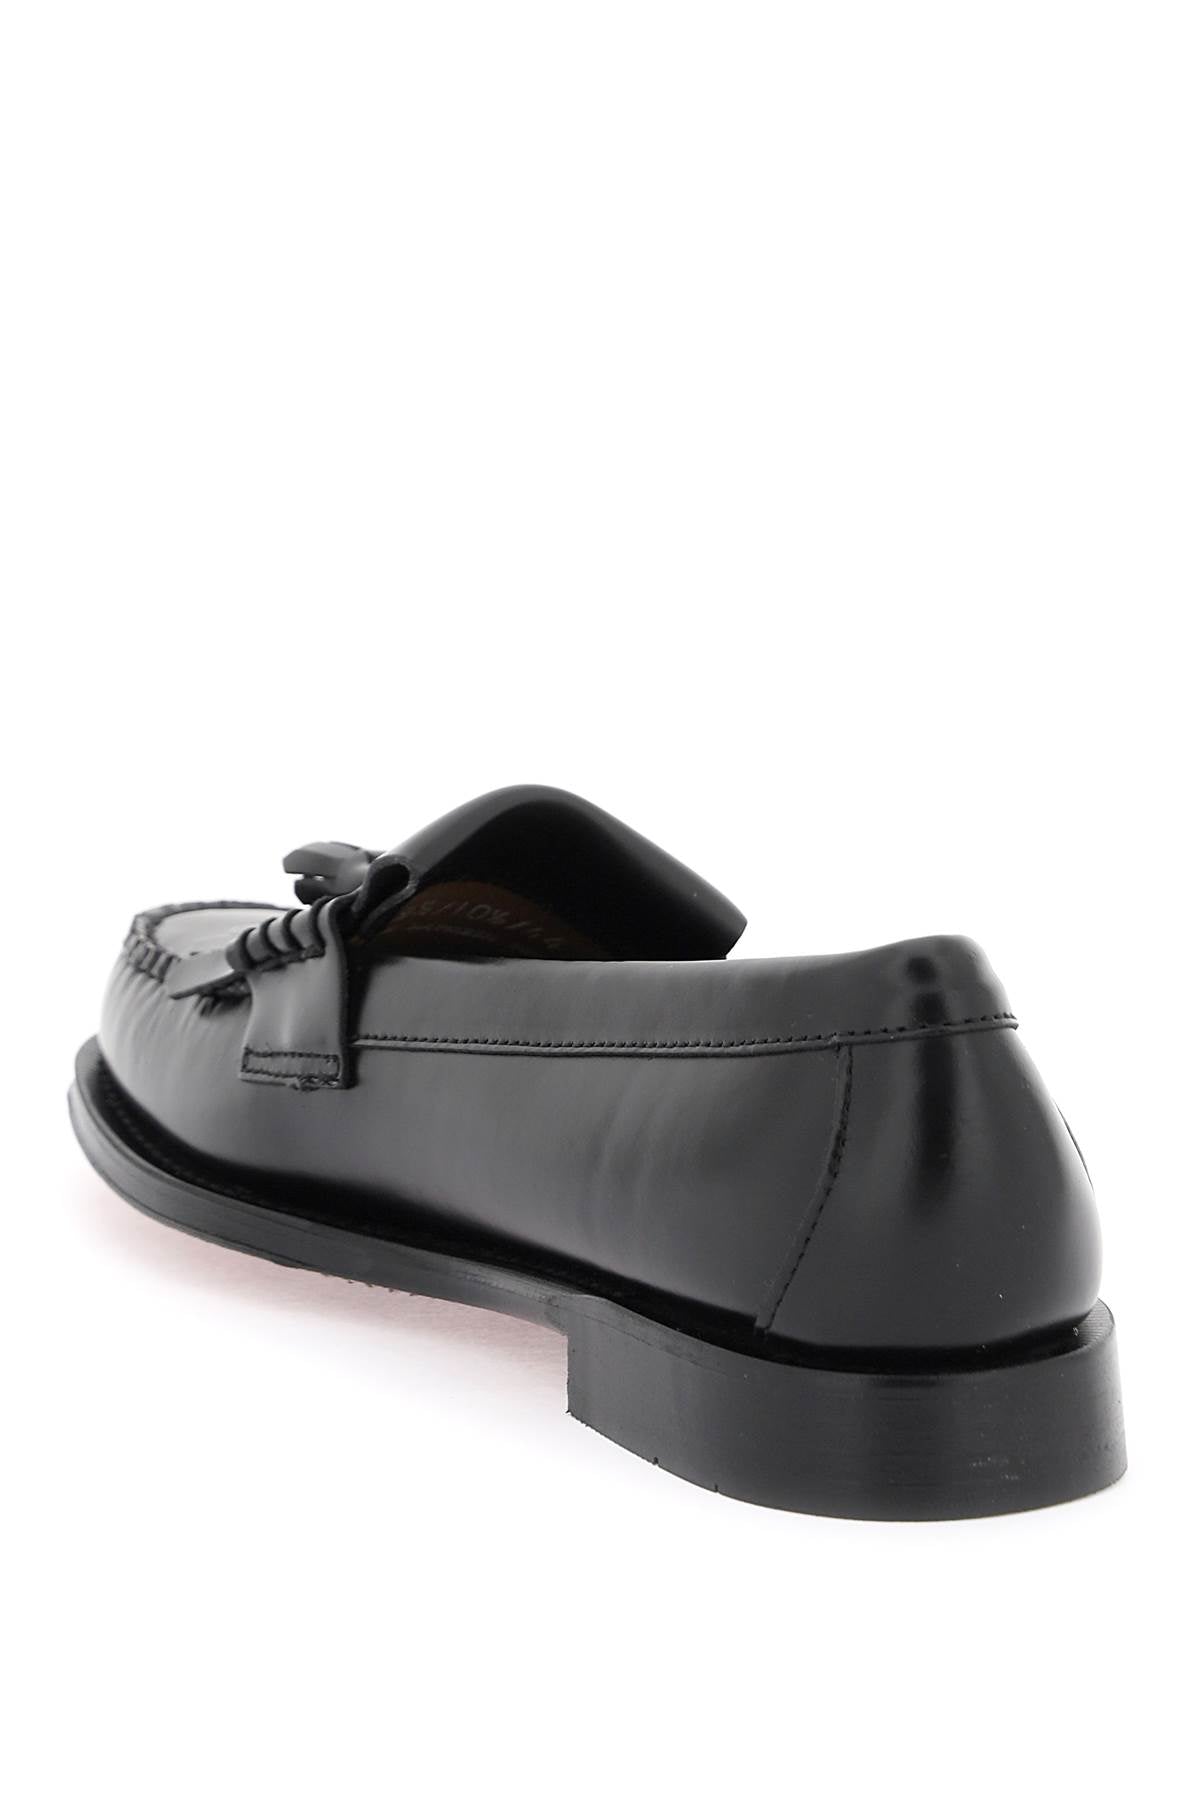 G.h. bass esther kiltie weejuns loafers-2